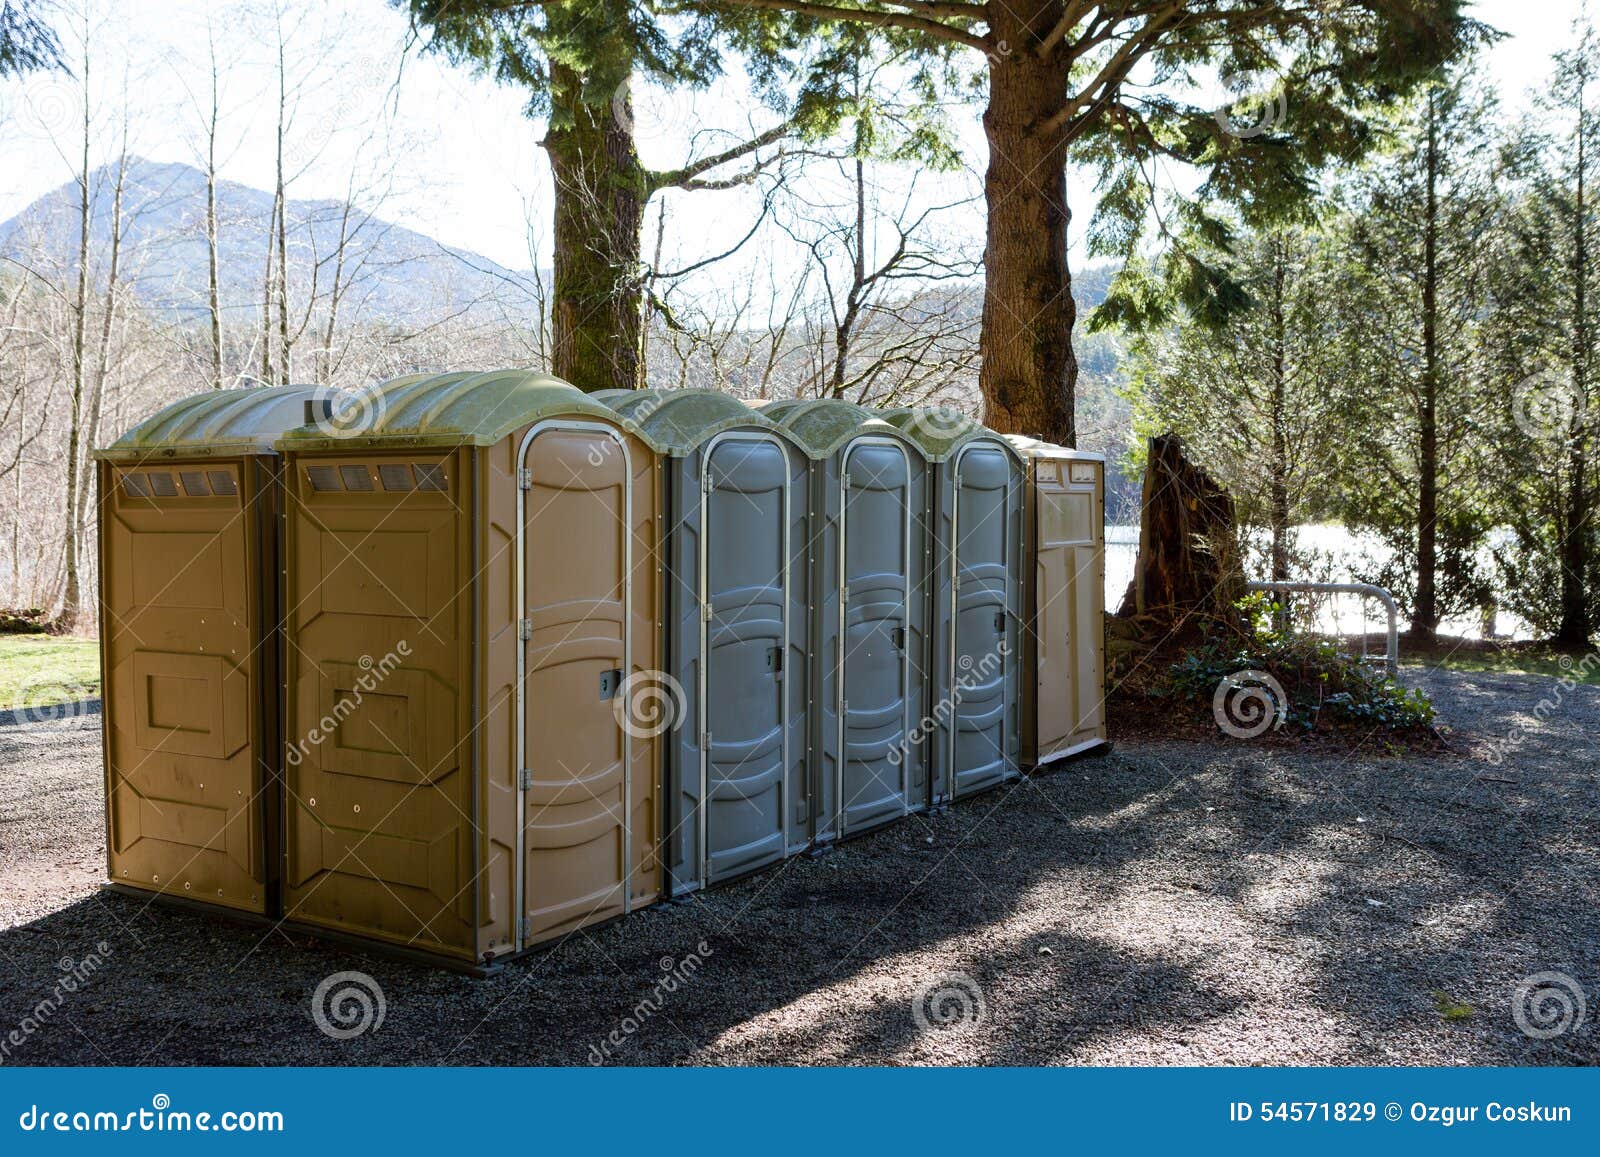 row of public portapotty toilets in a park